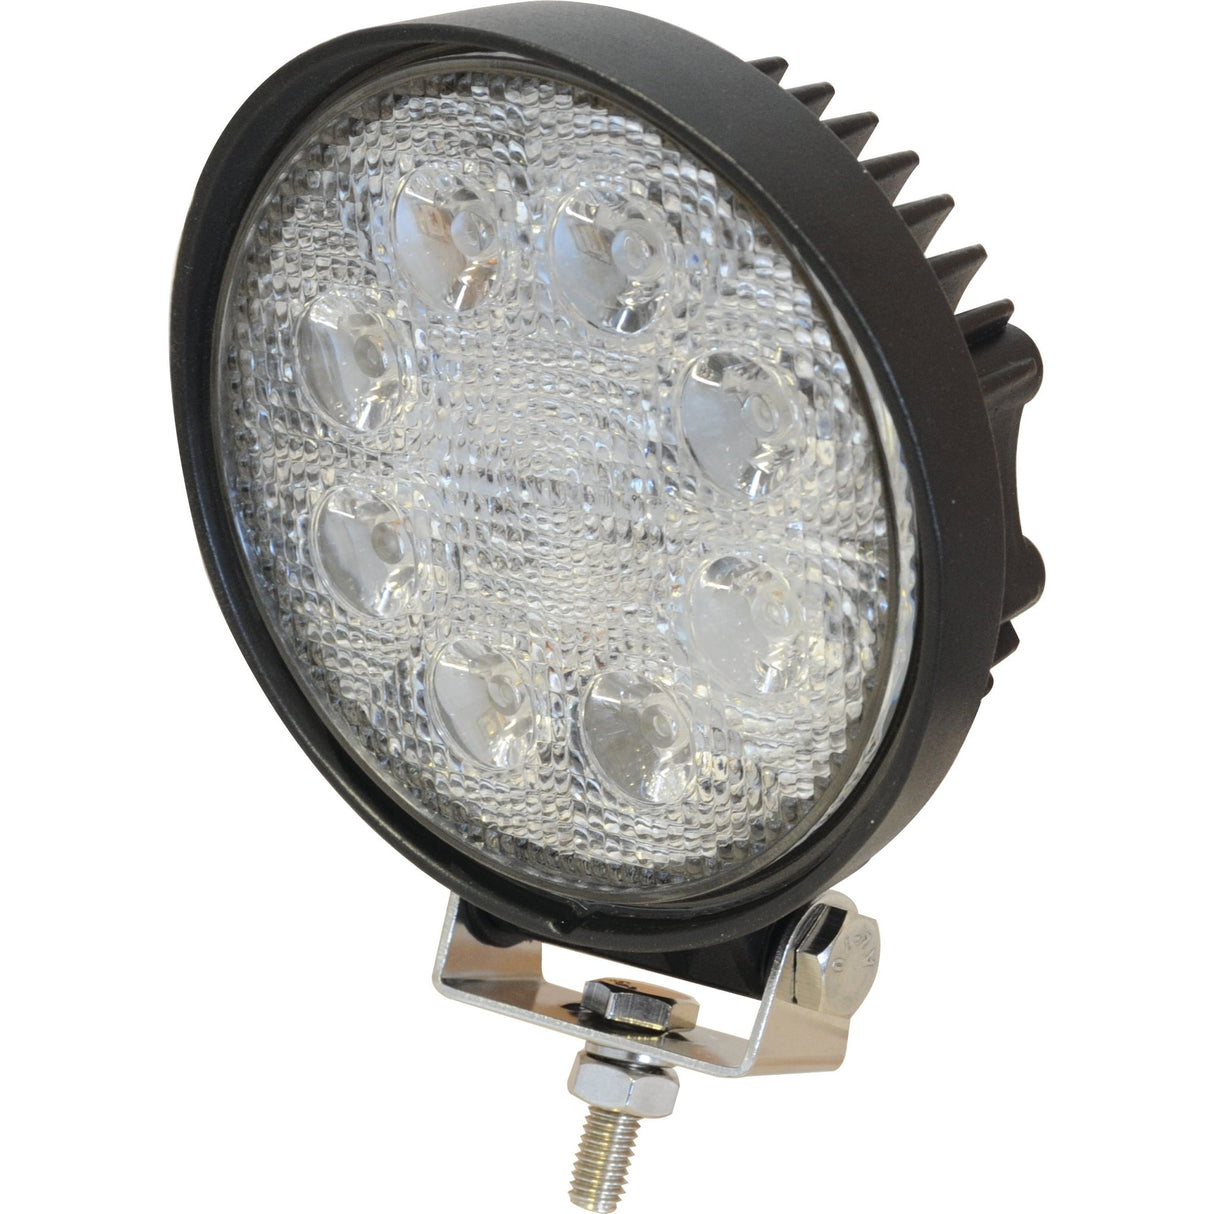 LED Work Light, Interference: Class 3, 1600 Lumens Raw, 10-30V ()
 - S.129485 - Farming Parts